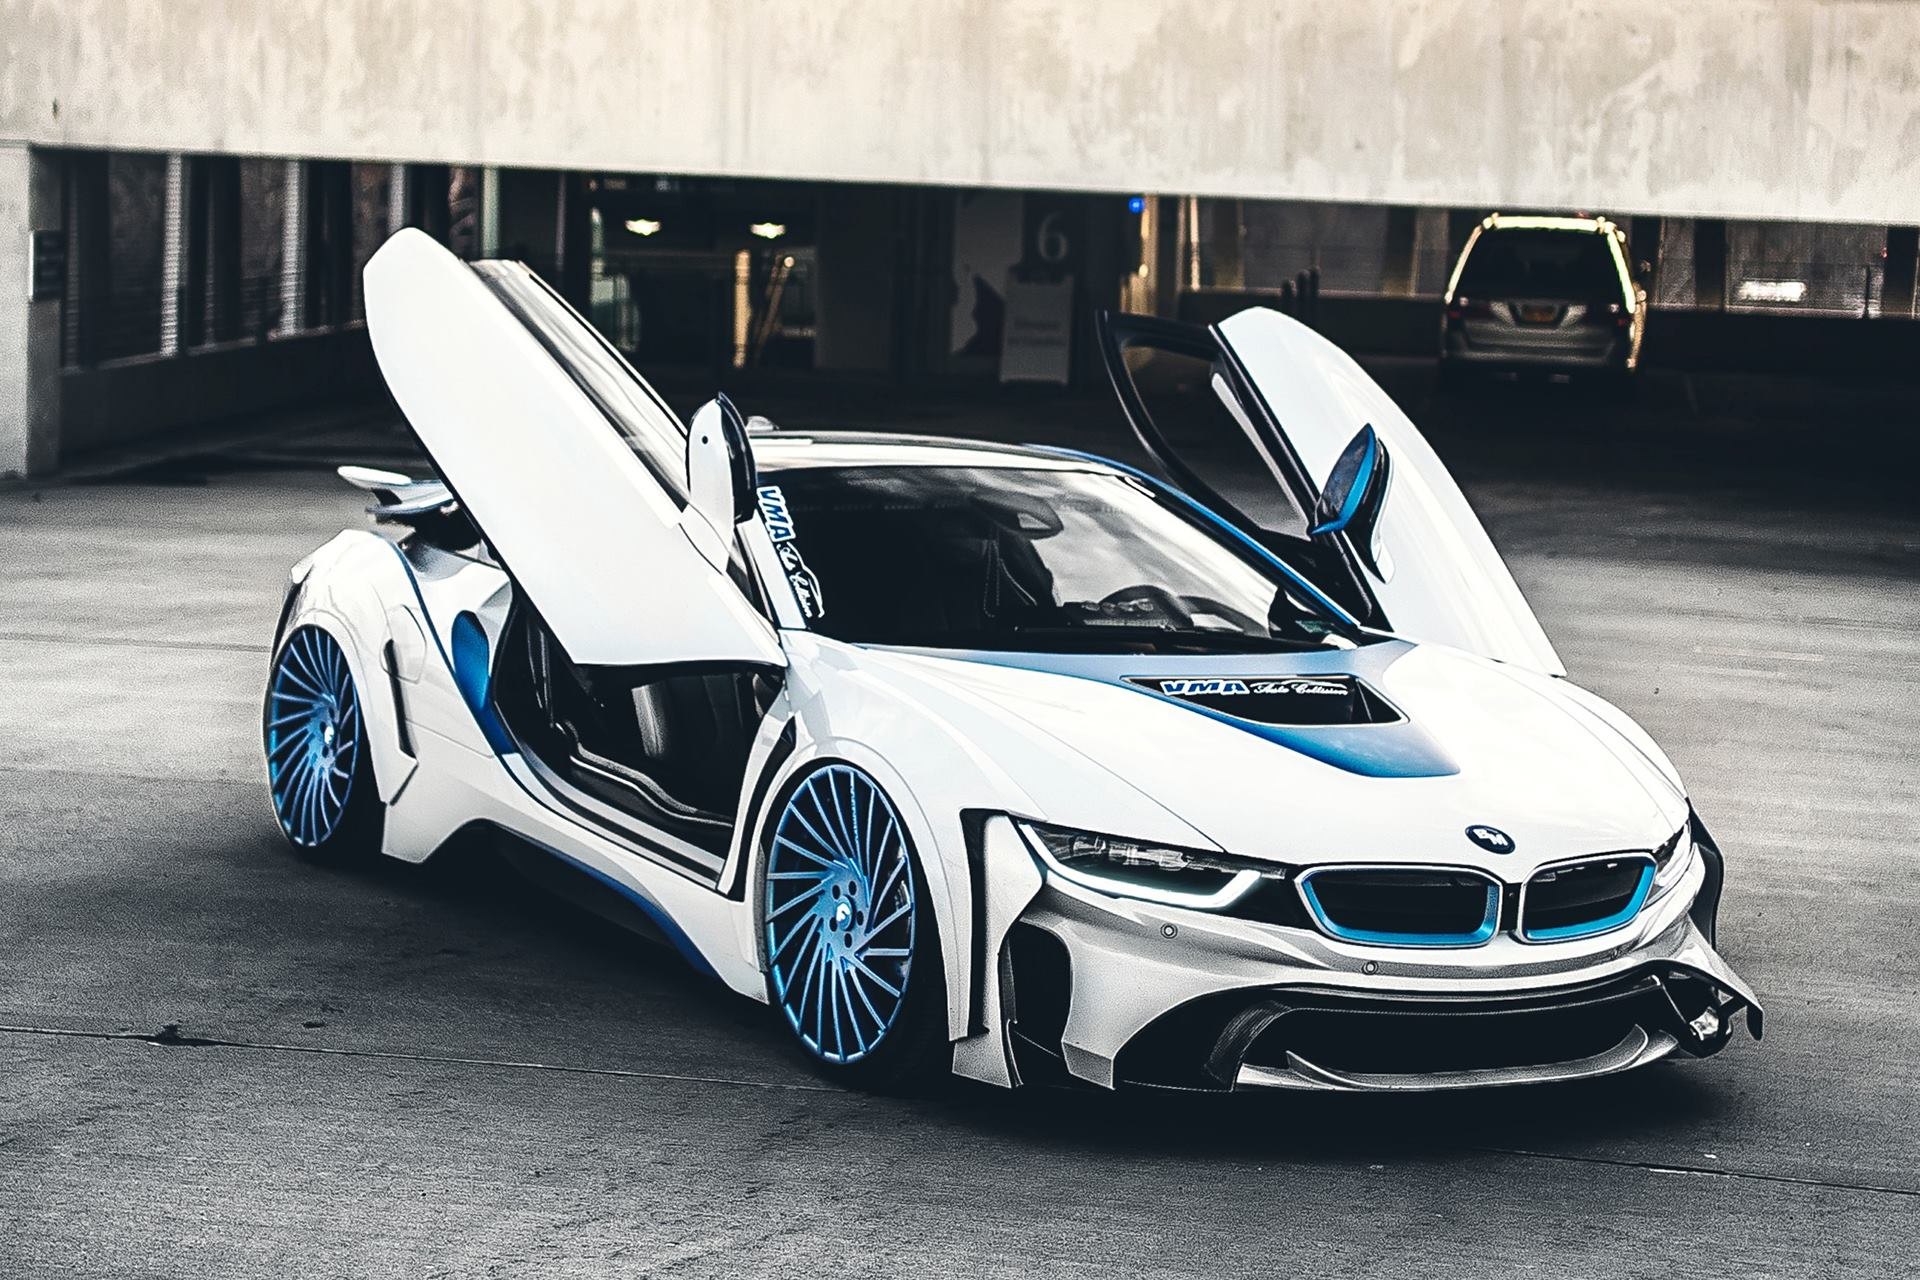 Custom White BMW i8 with Blue Accents - Photo by Forgiato